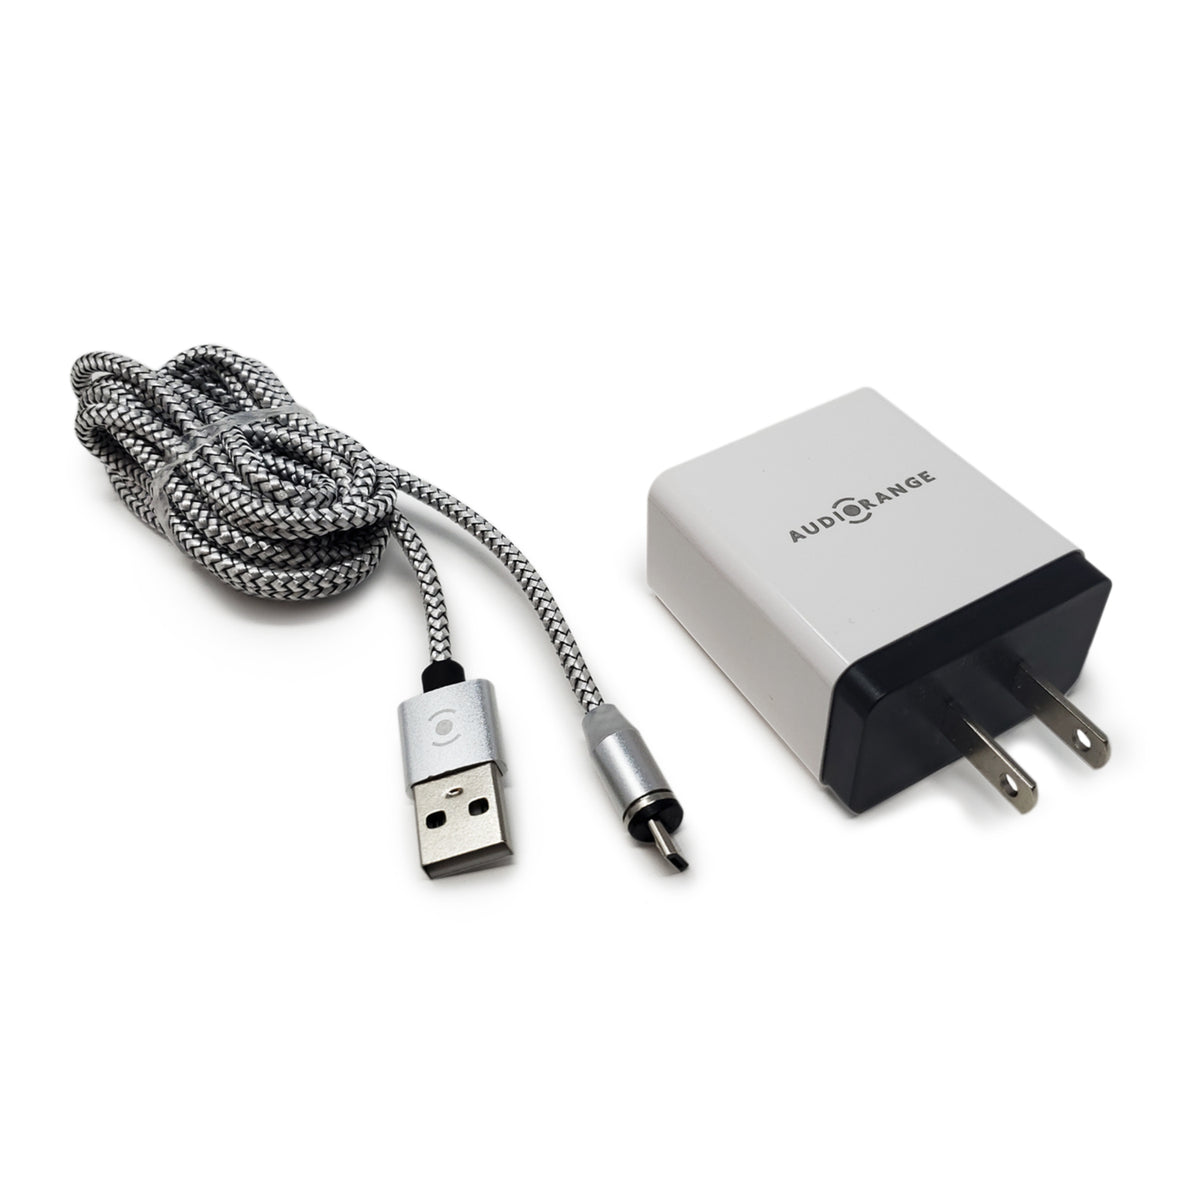 OTE-1000 Magnetic Charging Kit